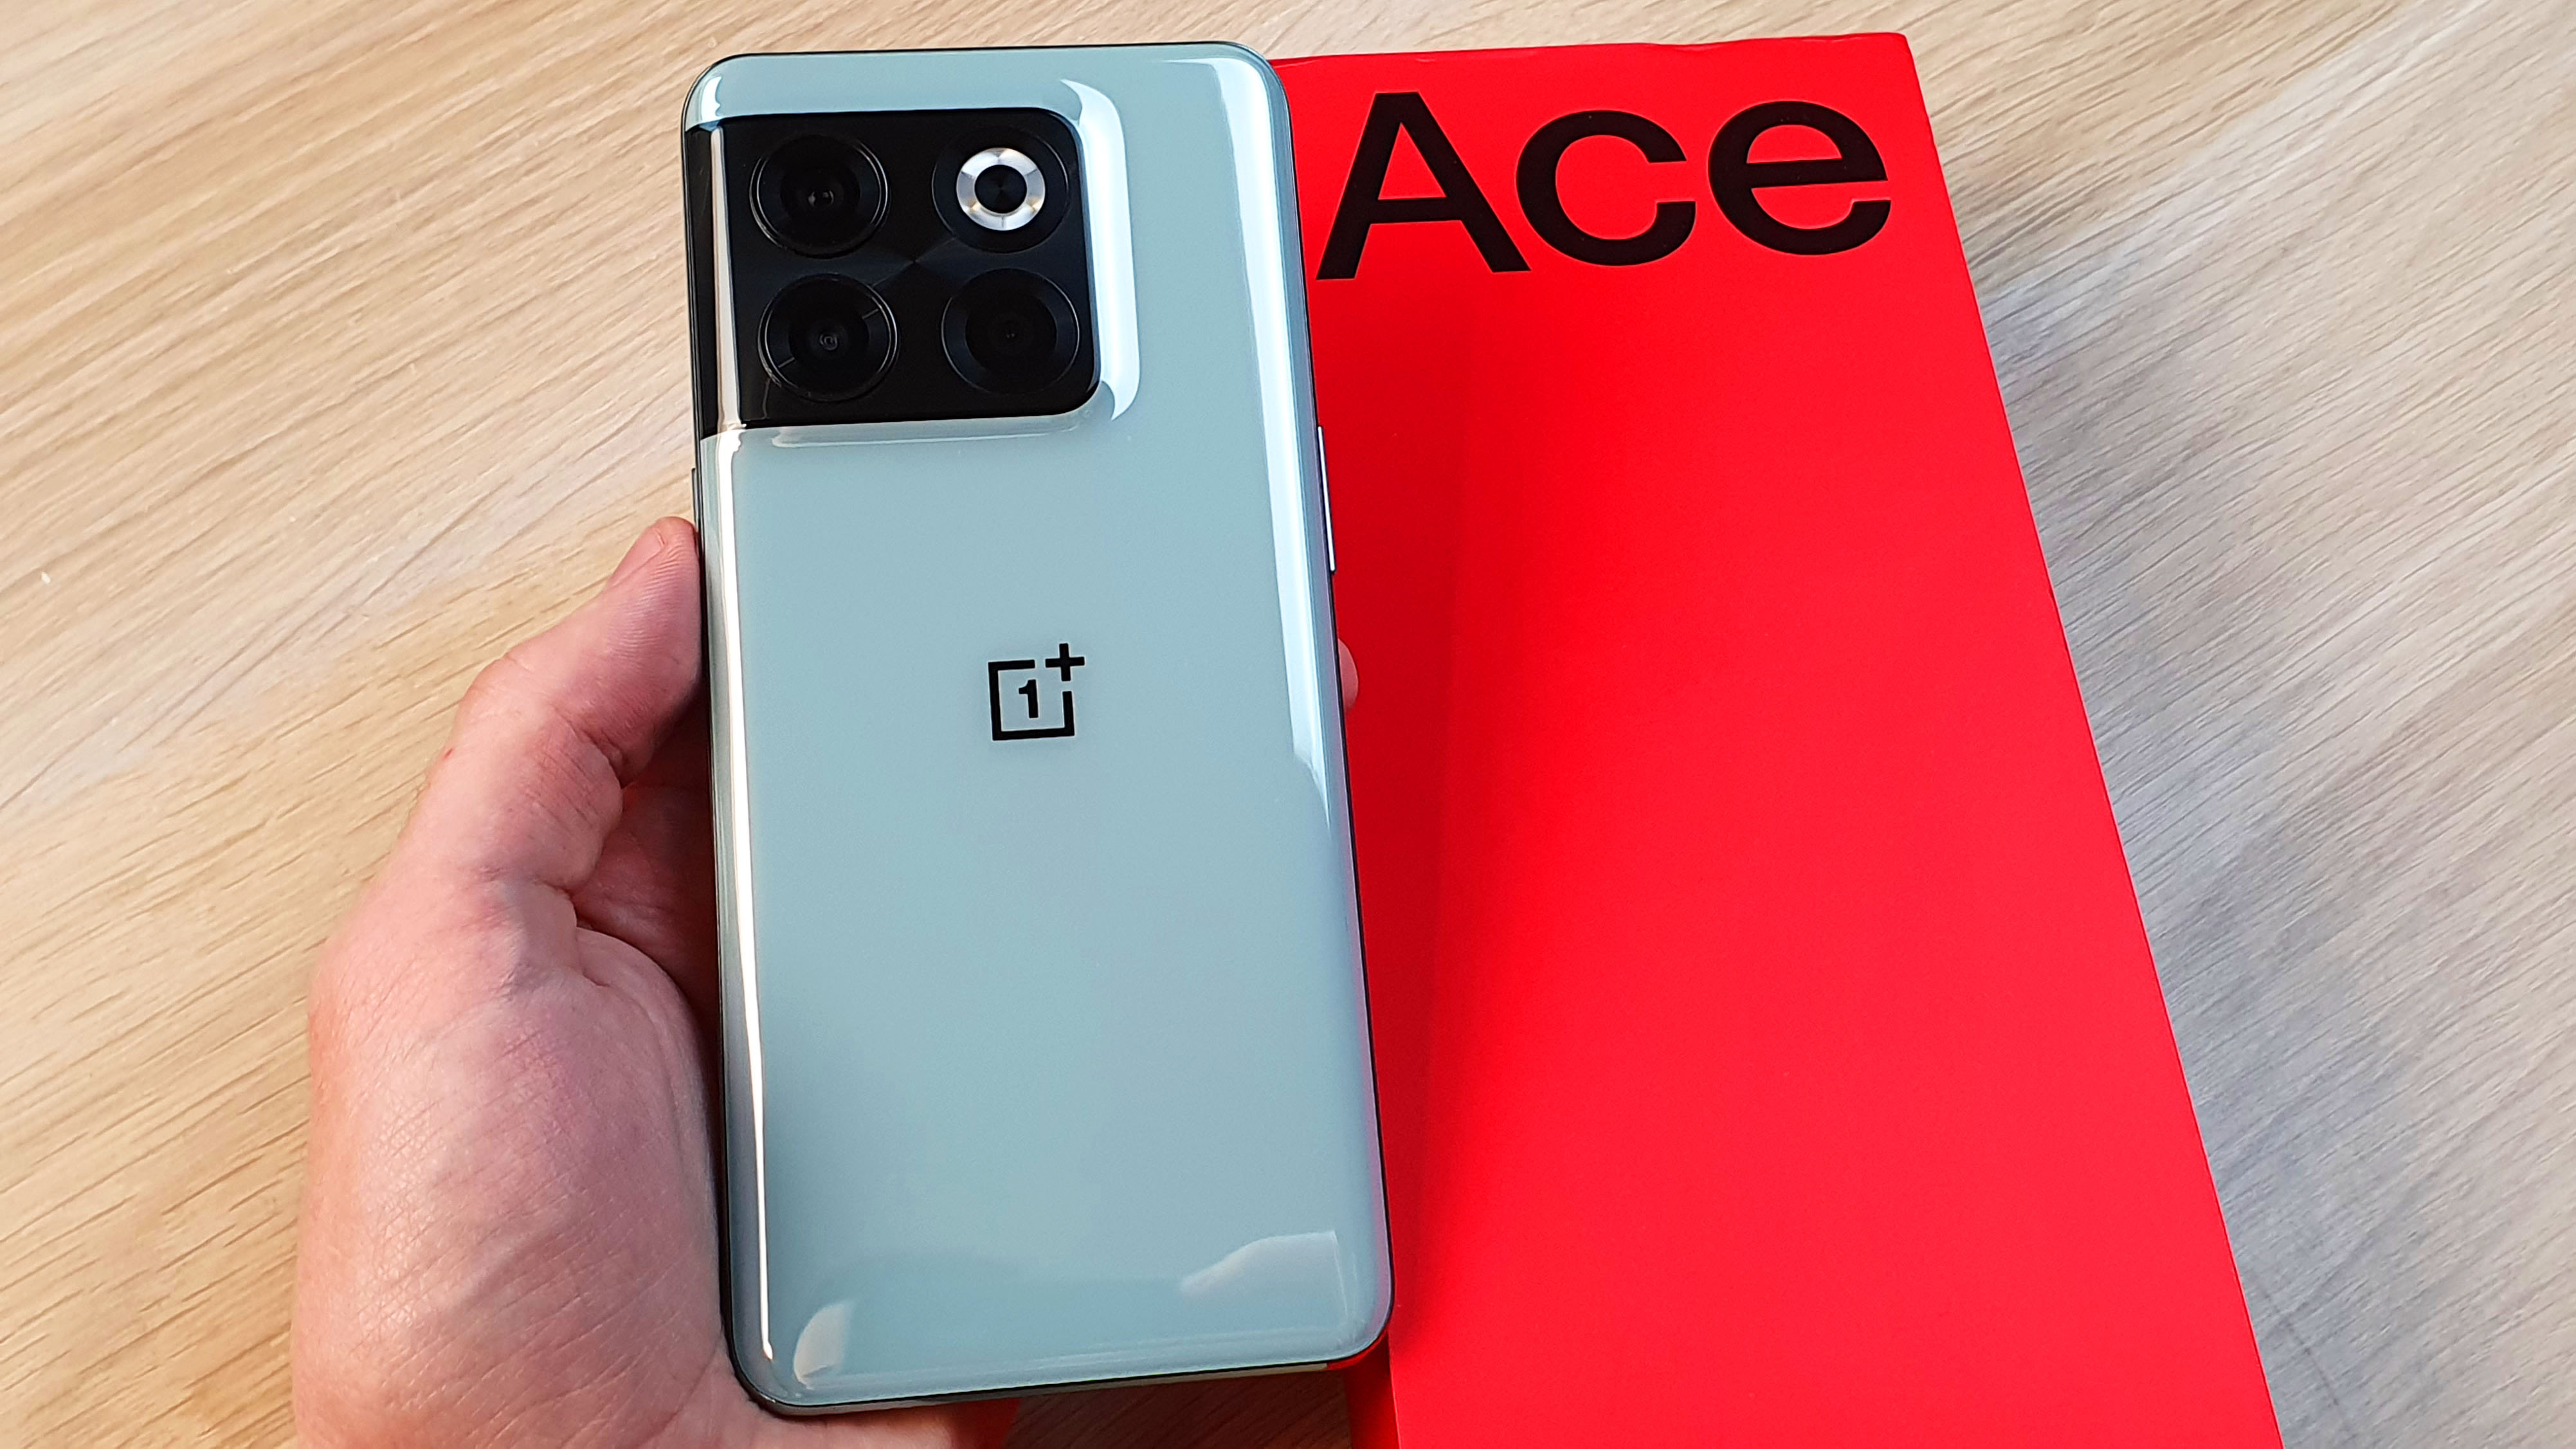 Oneplus ace v3. ONEPLUS 10t Ace Pro. ONEPLUS Ace 10r. ONEPLUS Ace Pro 16/256. ONEPLUS Ace Pro 256gb.